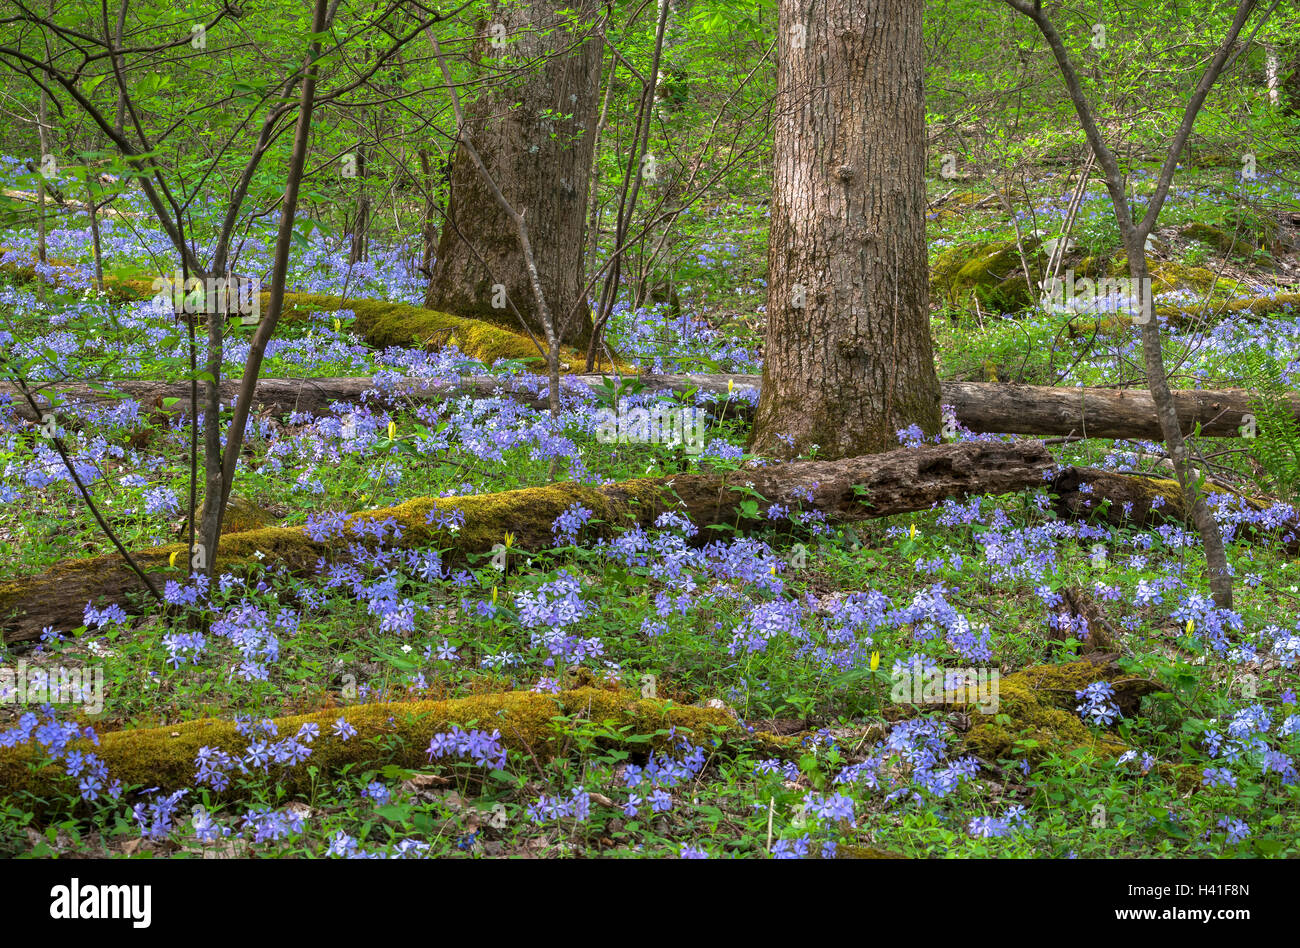 Great Smoky Mountains National Park, Tennessee: Wild blue phlox (Phlox divaricata) blooming under a forest understory Stock Photo